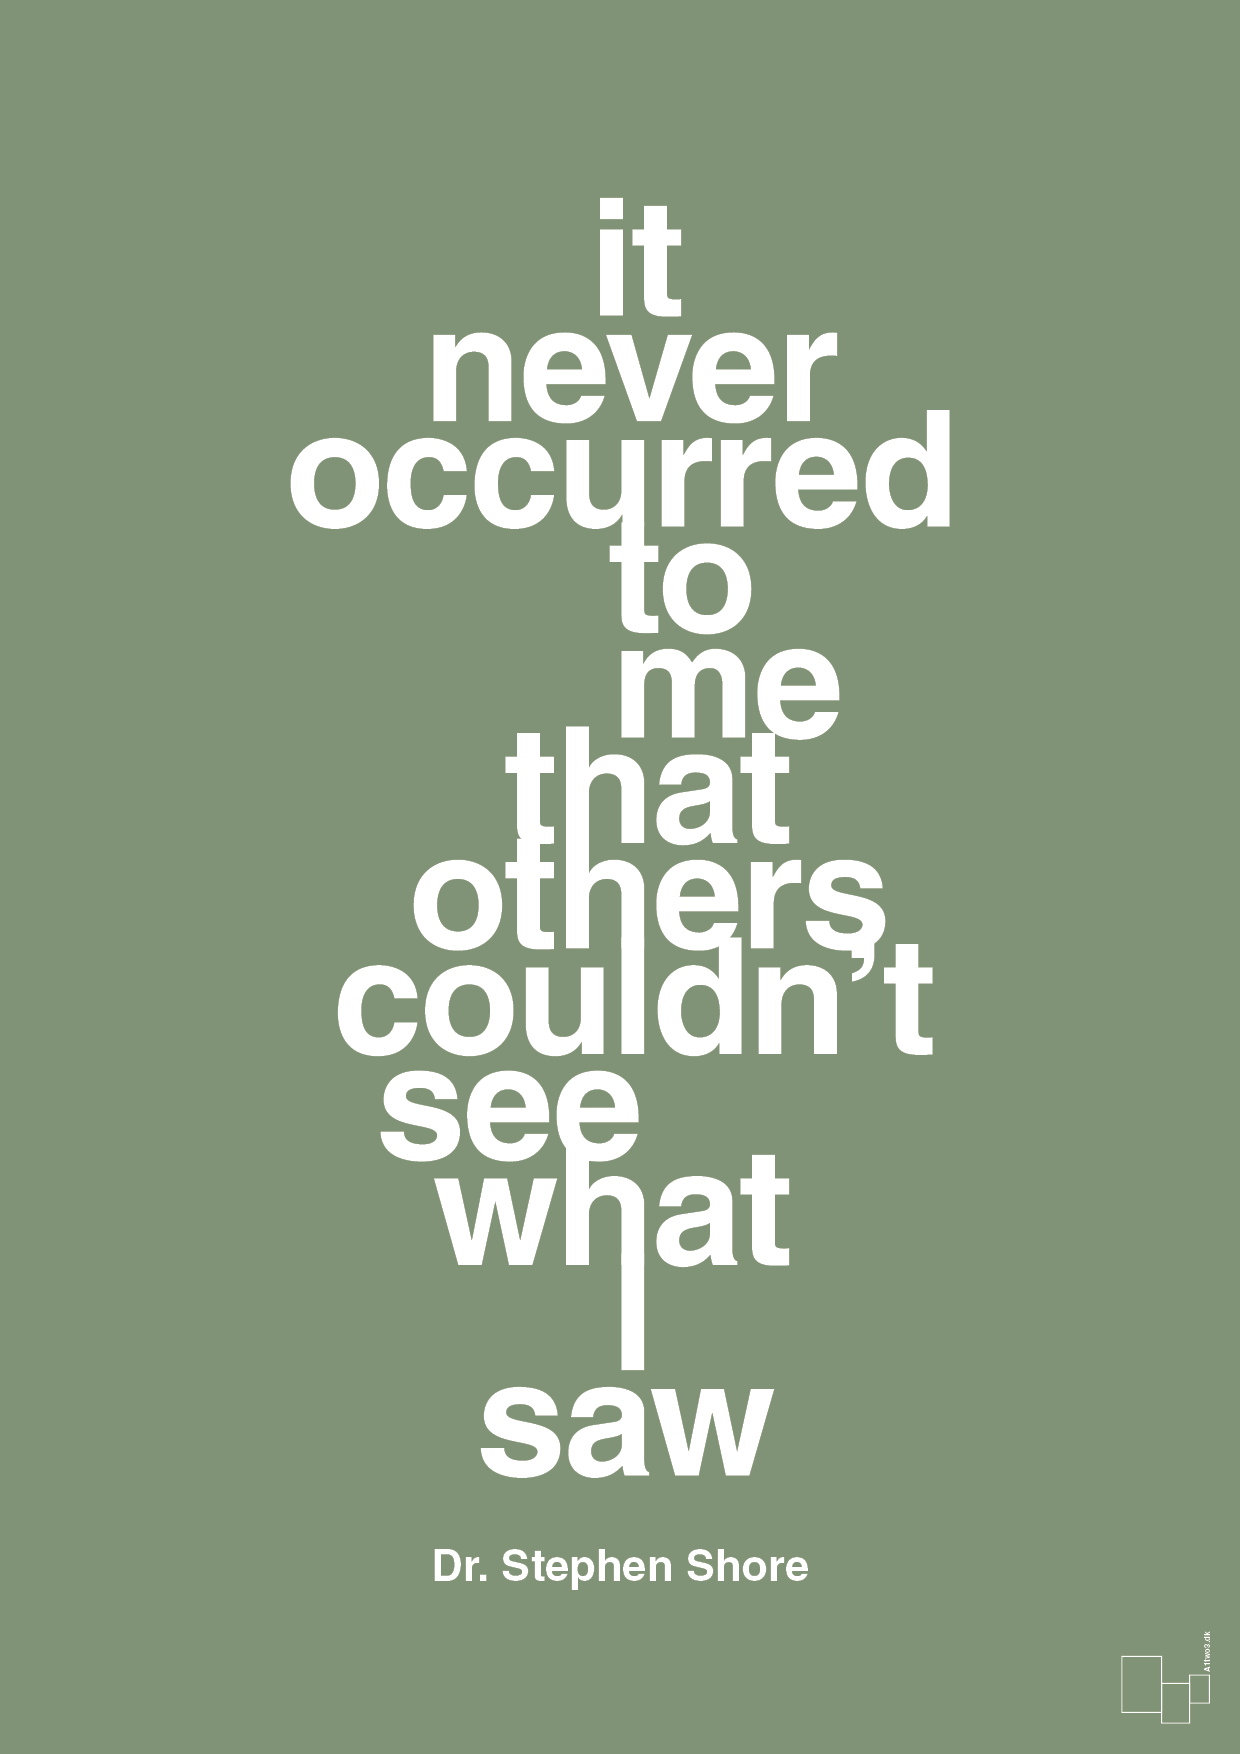 it never occurred to me that others couldn’t see what I saw - Plakat med Samfund i Jade